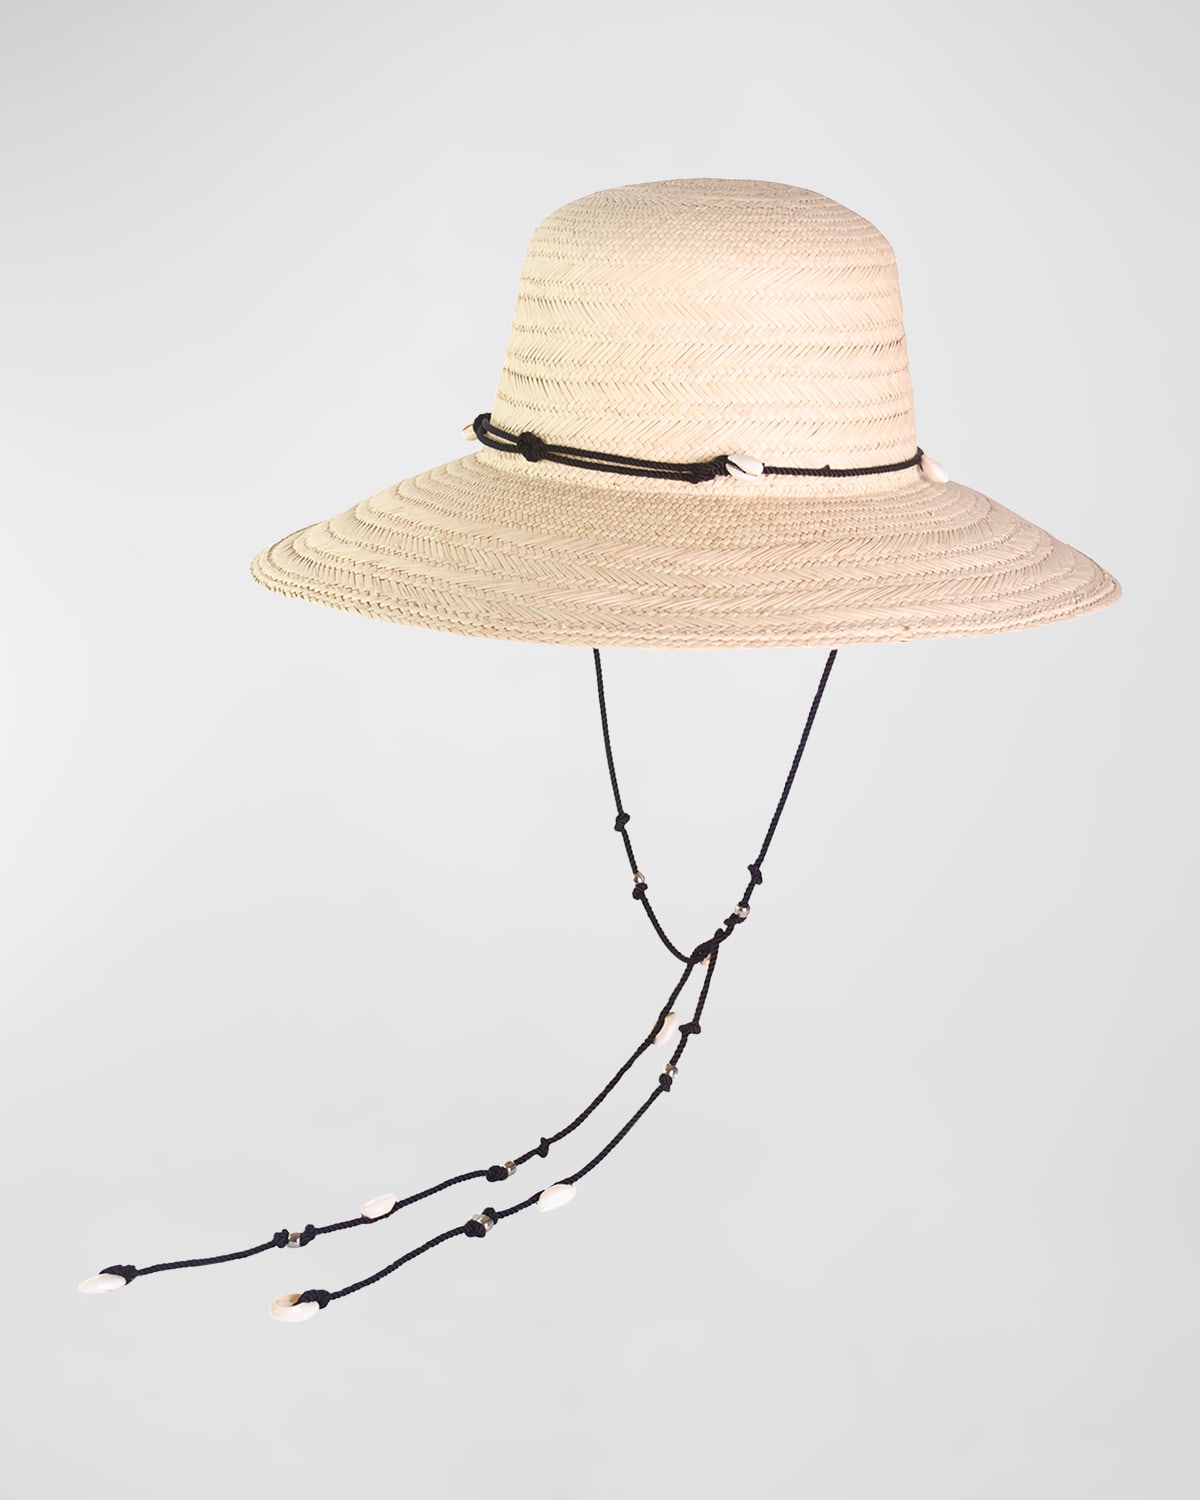 Shop Sensi Studio Lampshade Texturized Straw Bucket Hat With Shells In Natural Straw Black Leather